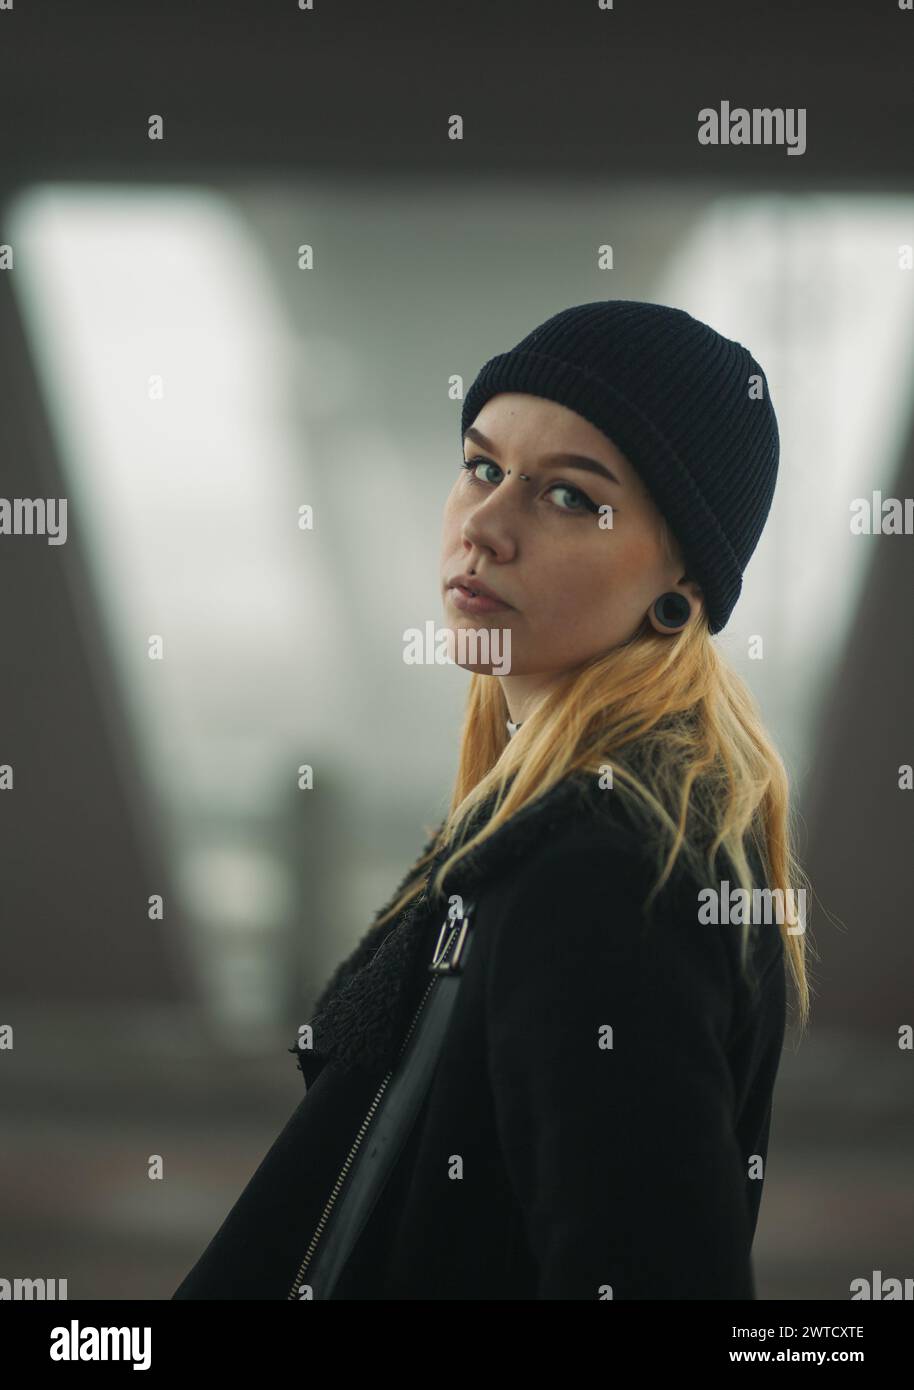 Edgy female model with piercings, beanie and blond hair. Dark tones and blurry background Stock Photo